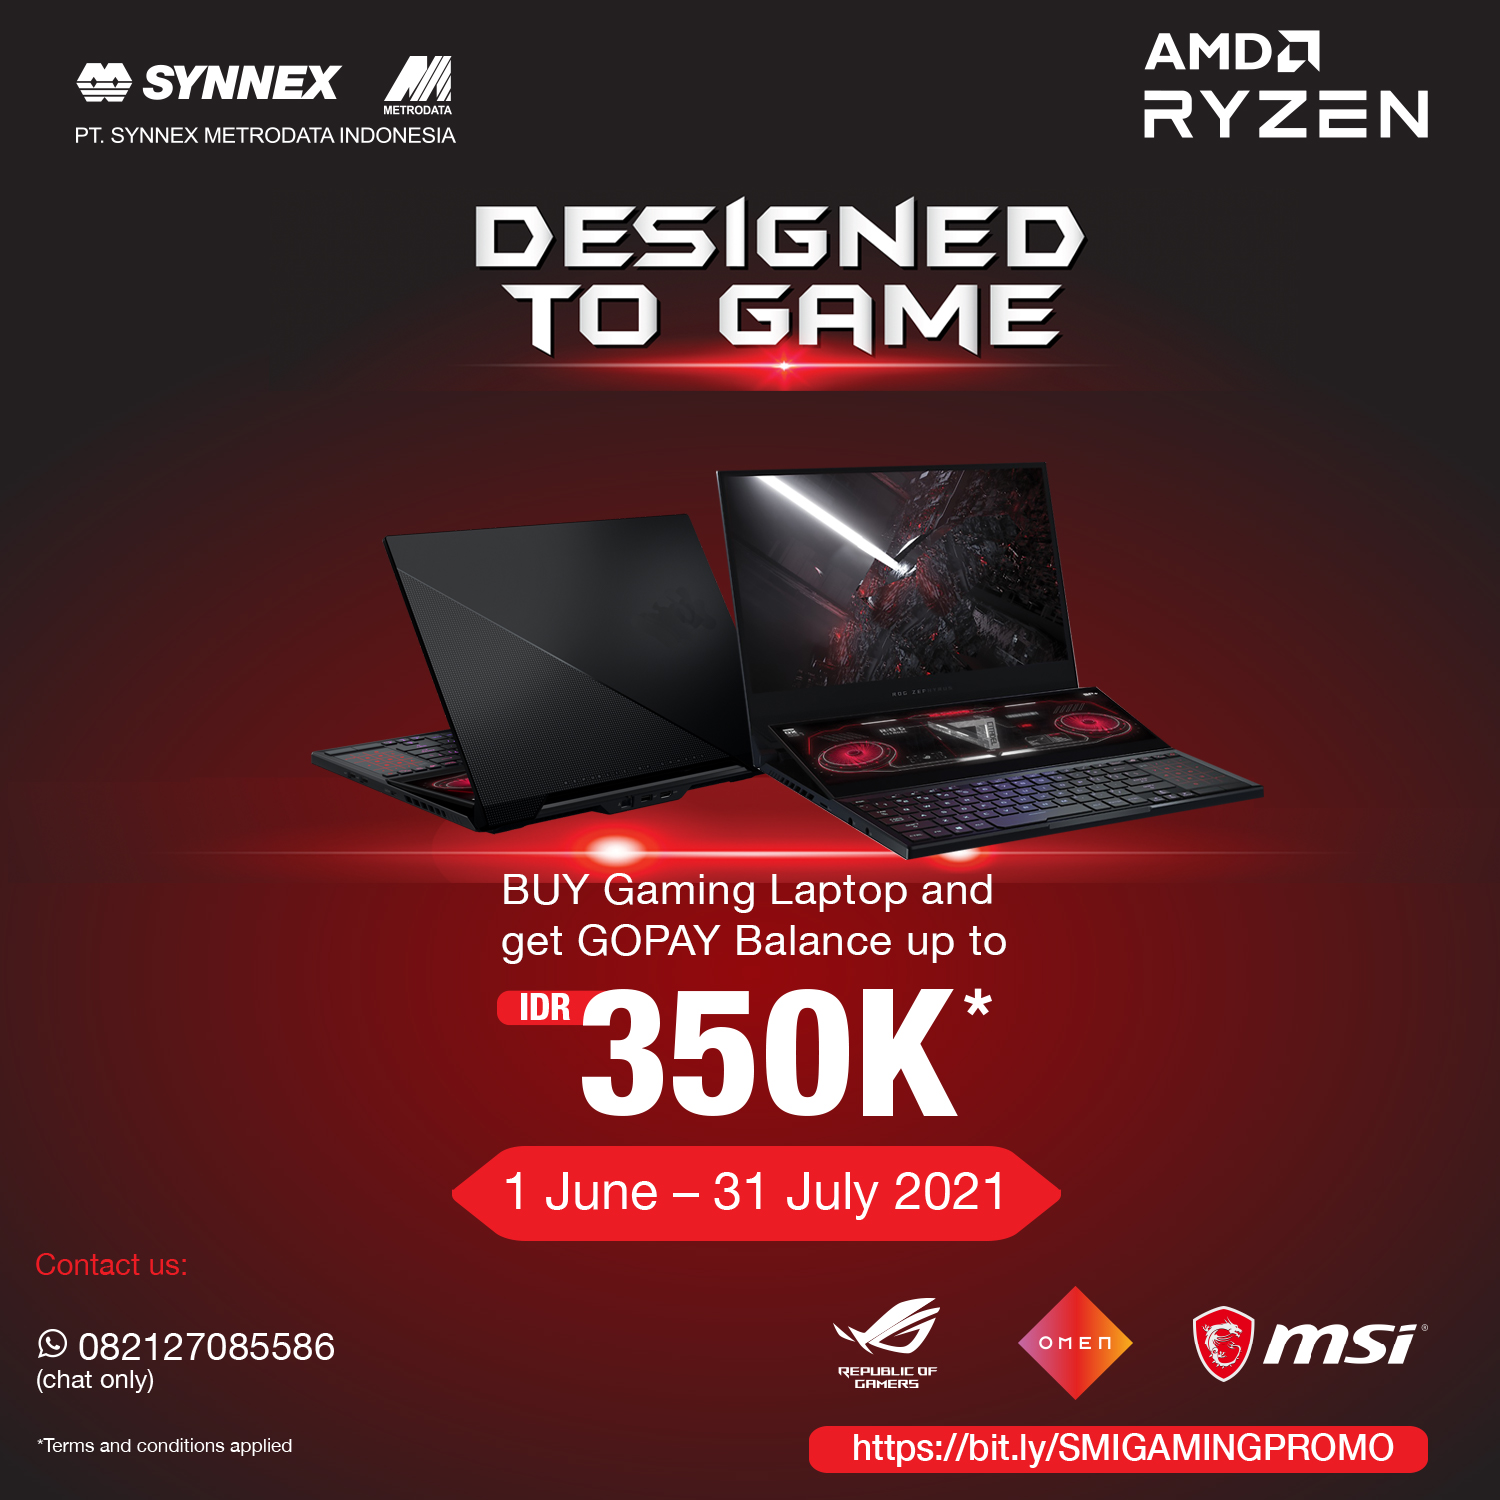 Designed to Game : Buy Gaming Laptop and Get GOPAY Balance up to IDR 350K*